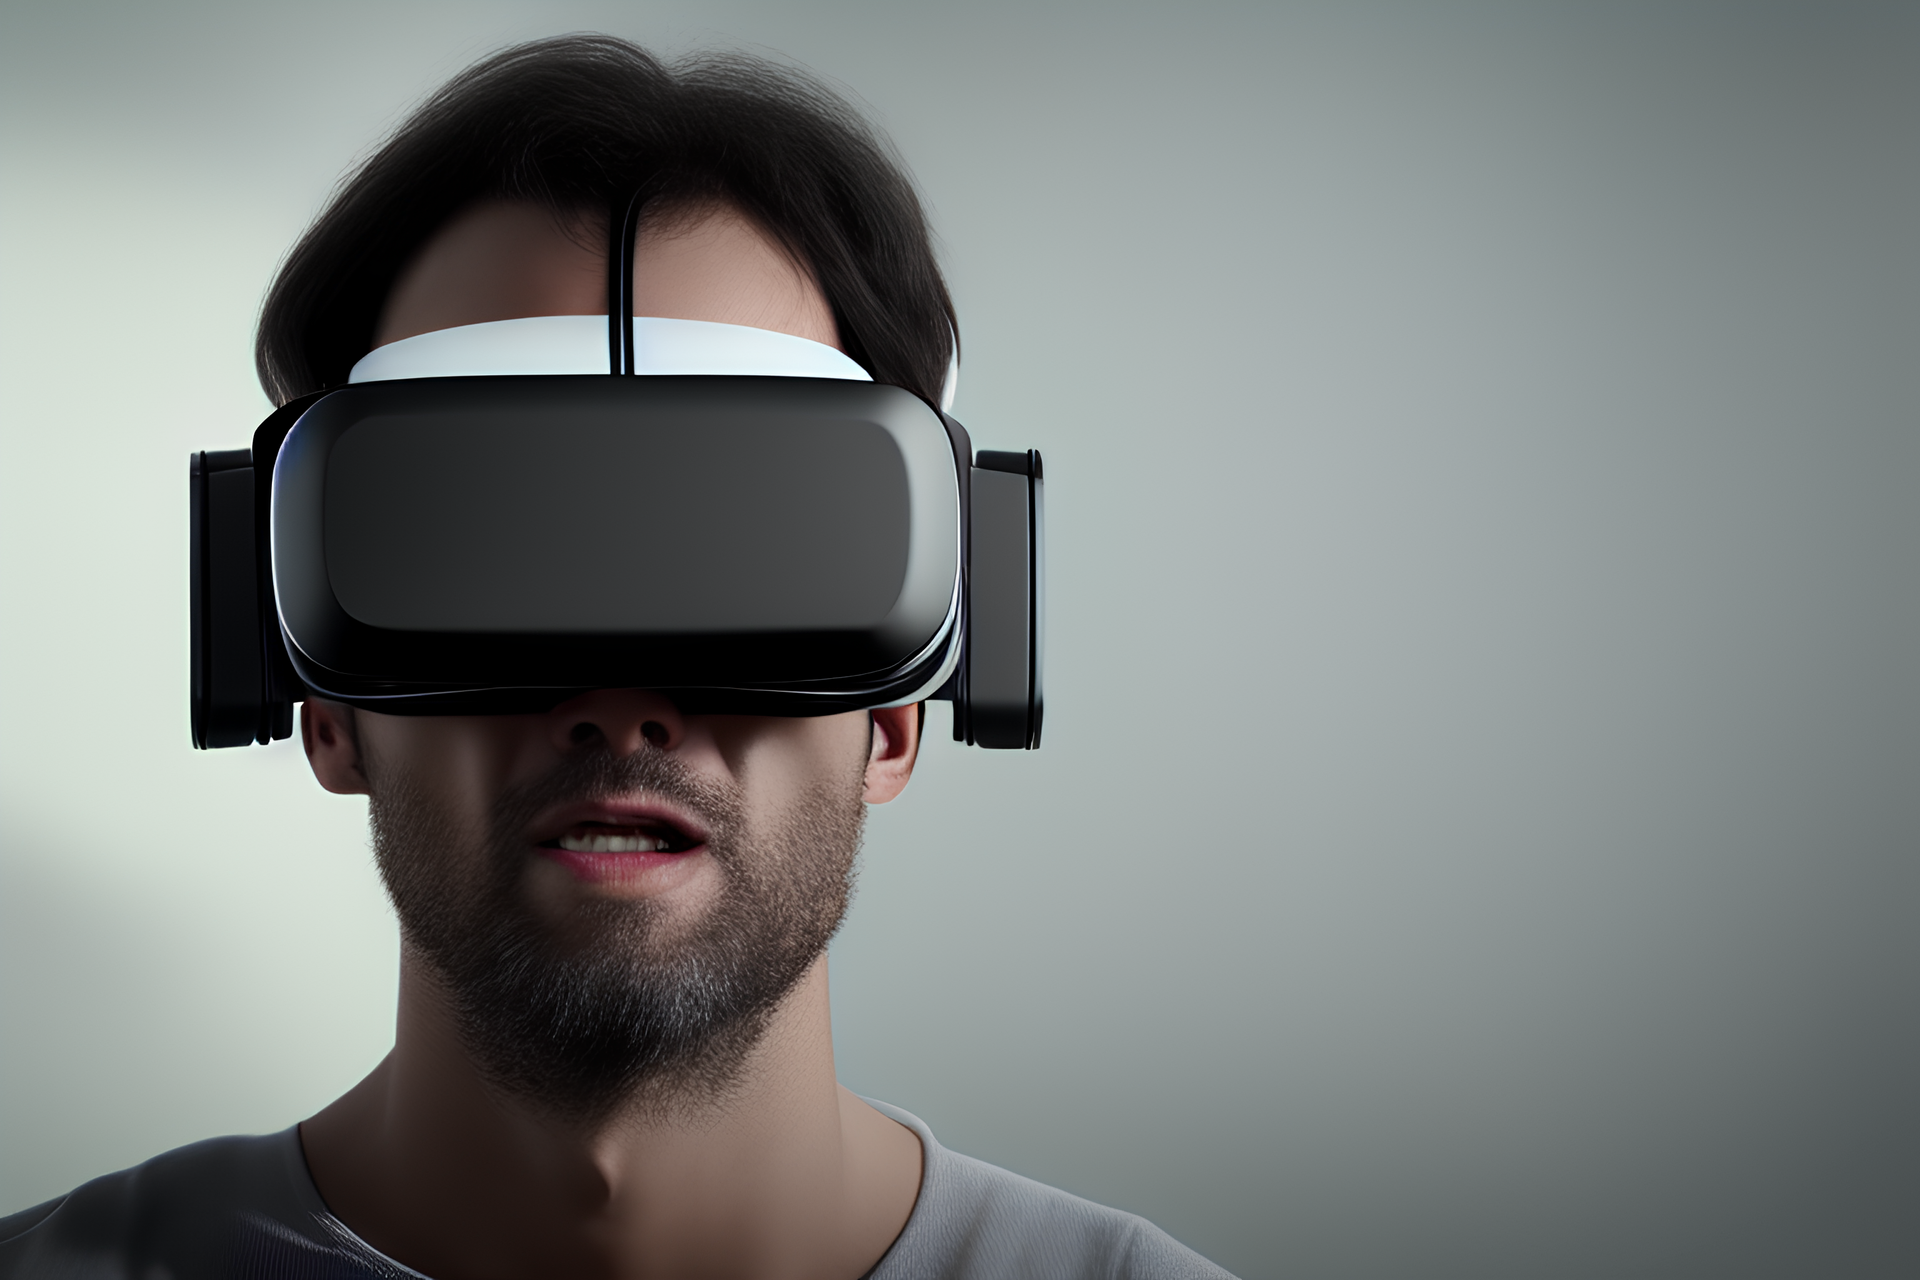 using virtual reality headset with audio